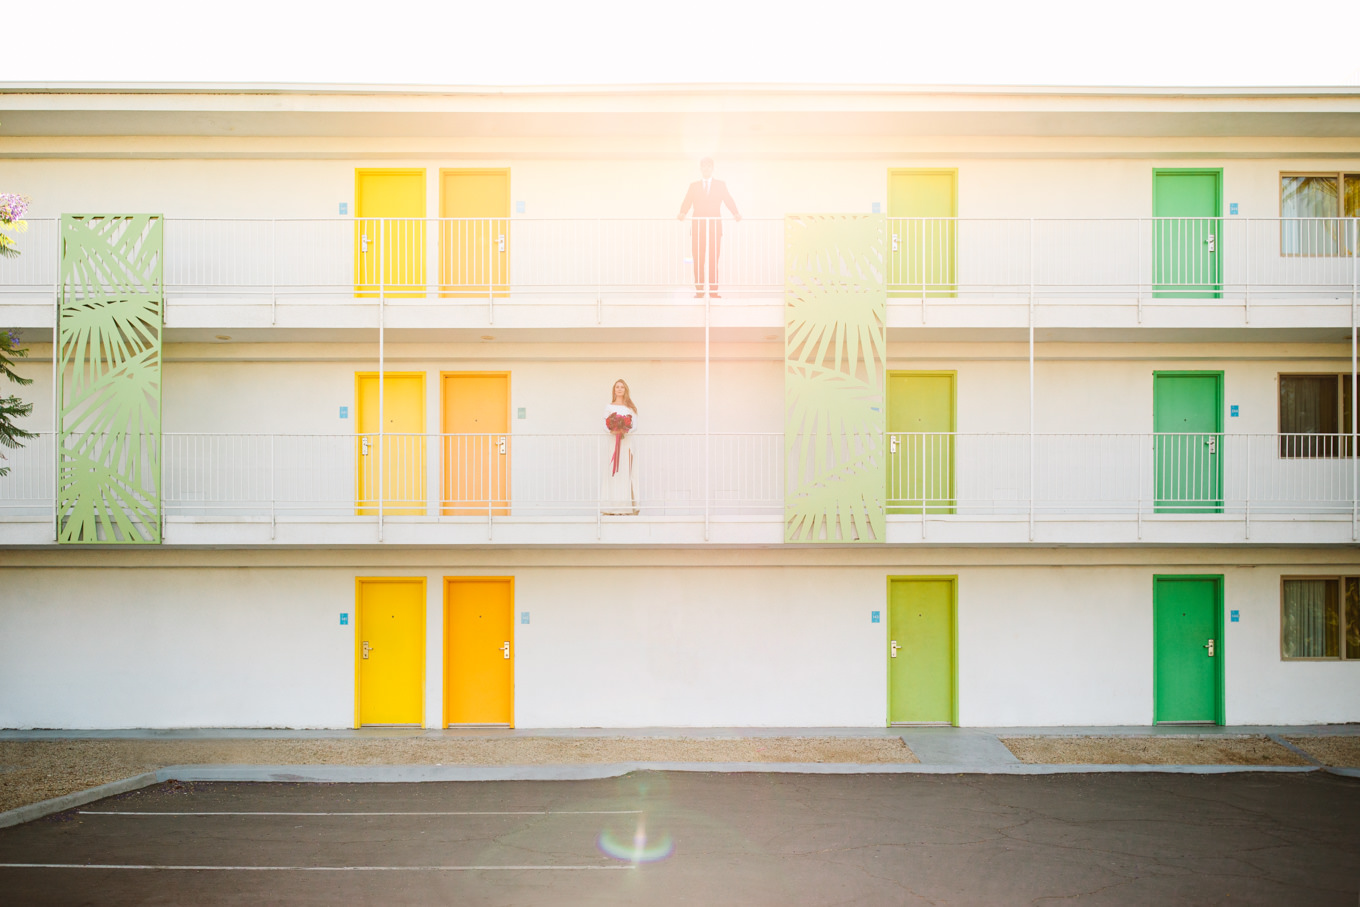 Bride and groom walking at colorful Saguaro Hotel | Colorful jewel tone Palm Springs elopement | Fresh and colorful photography for fun-loving couples in Southern California | #colorfulelopement #palmspringselopement #elopementphotography #palmspringswedding Source: Mary Costa Photography | Los Angeles